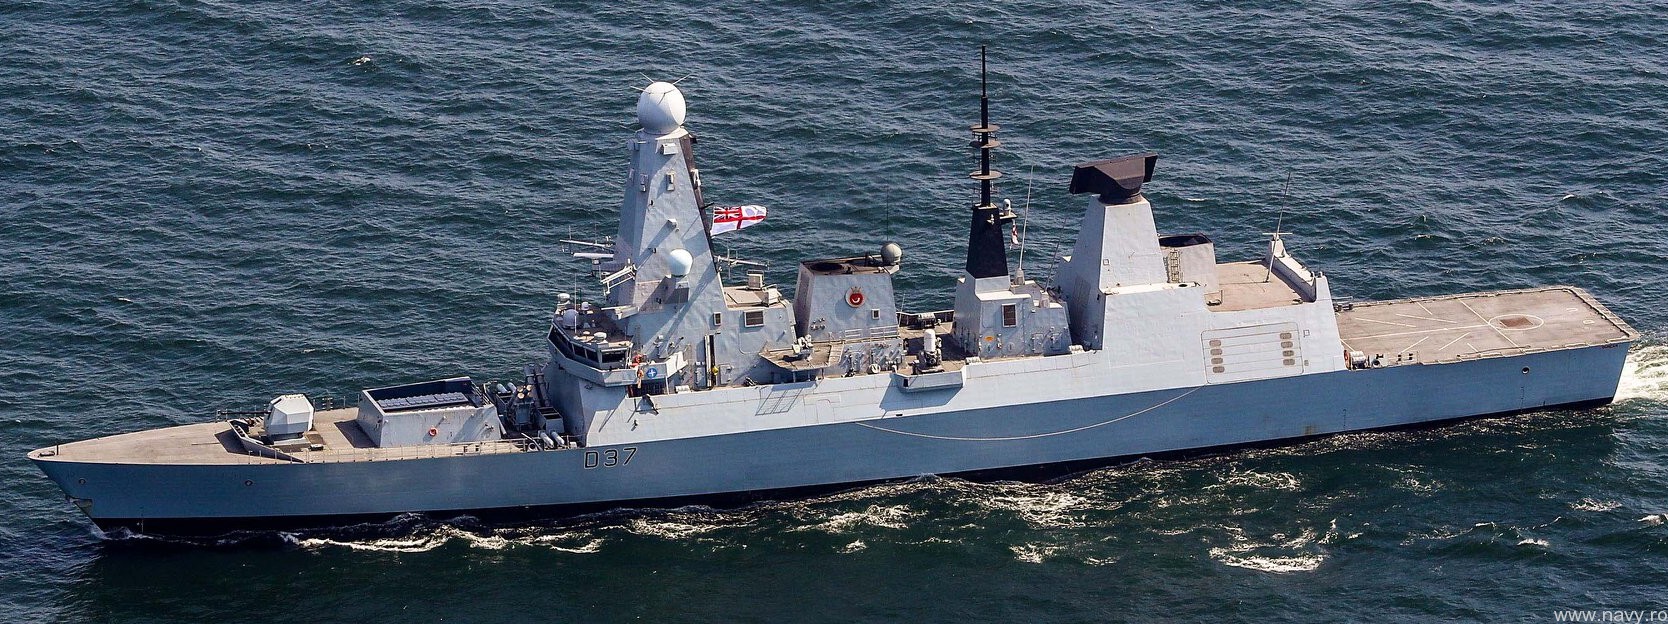 d37 hms duncan d-37 type 45 daring class guided missile destroyer ddg royal navy sea viper 43